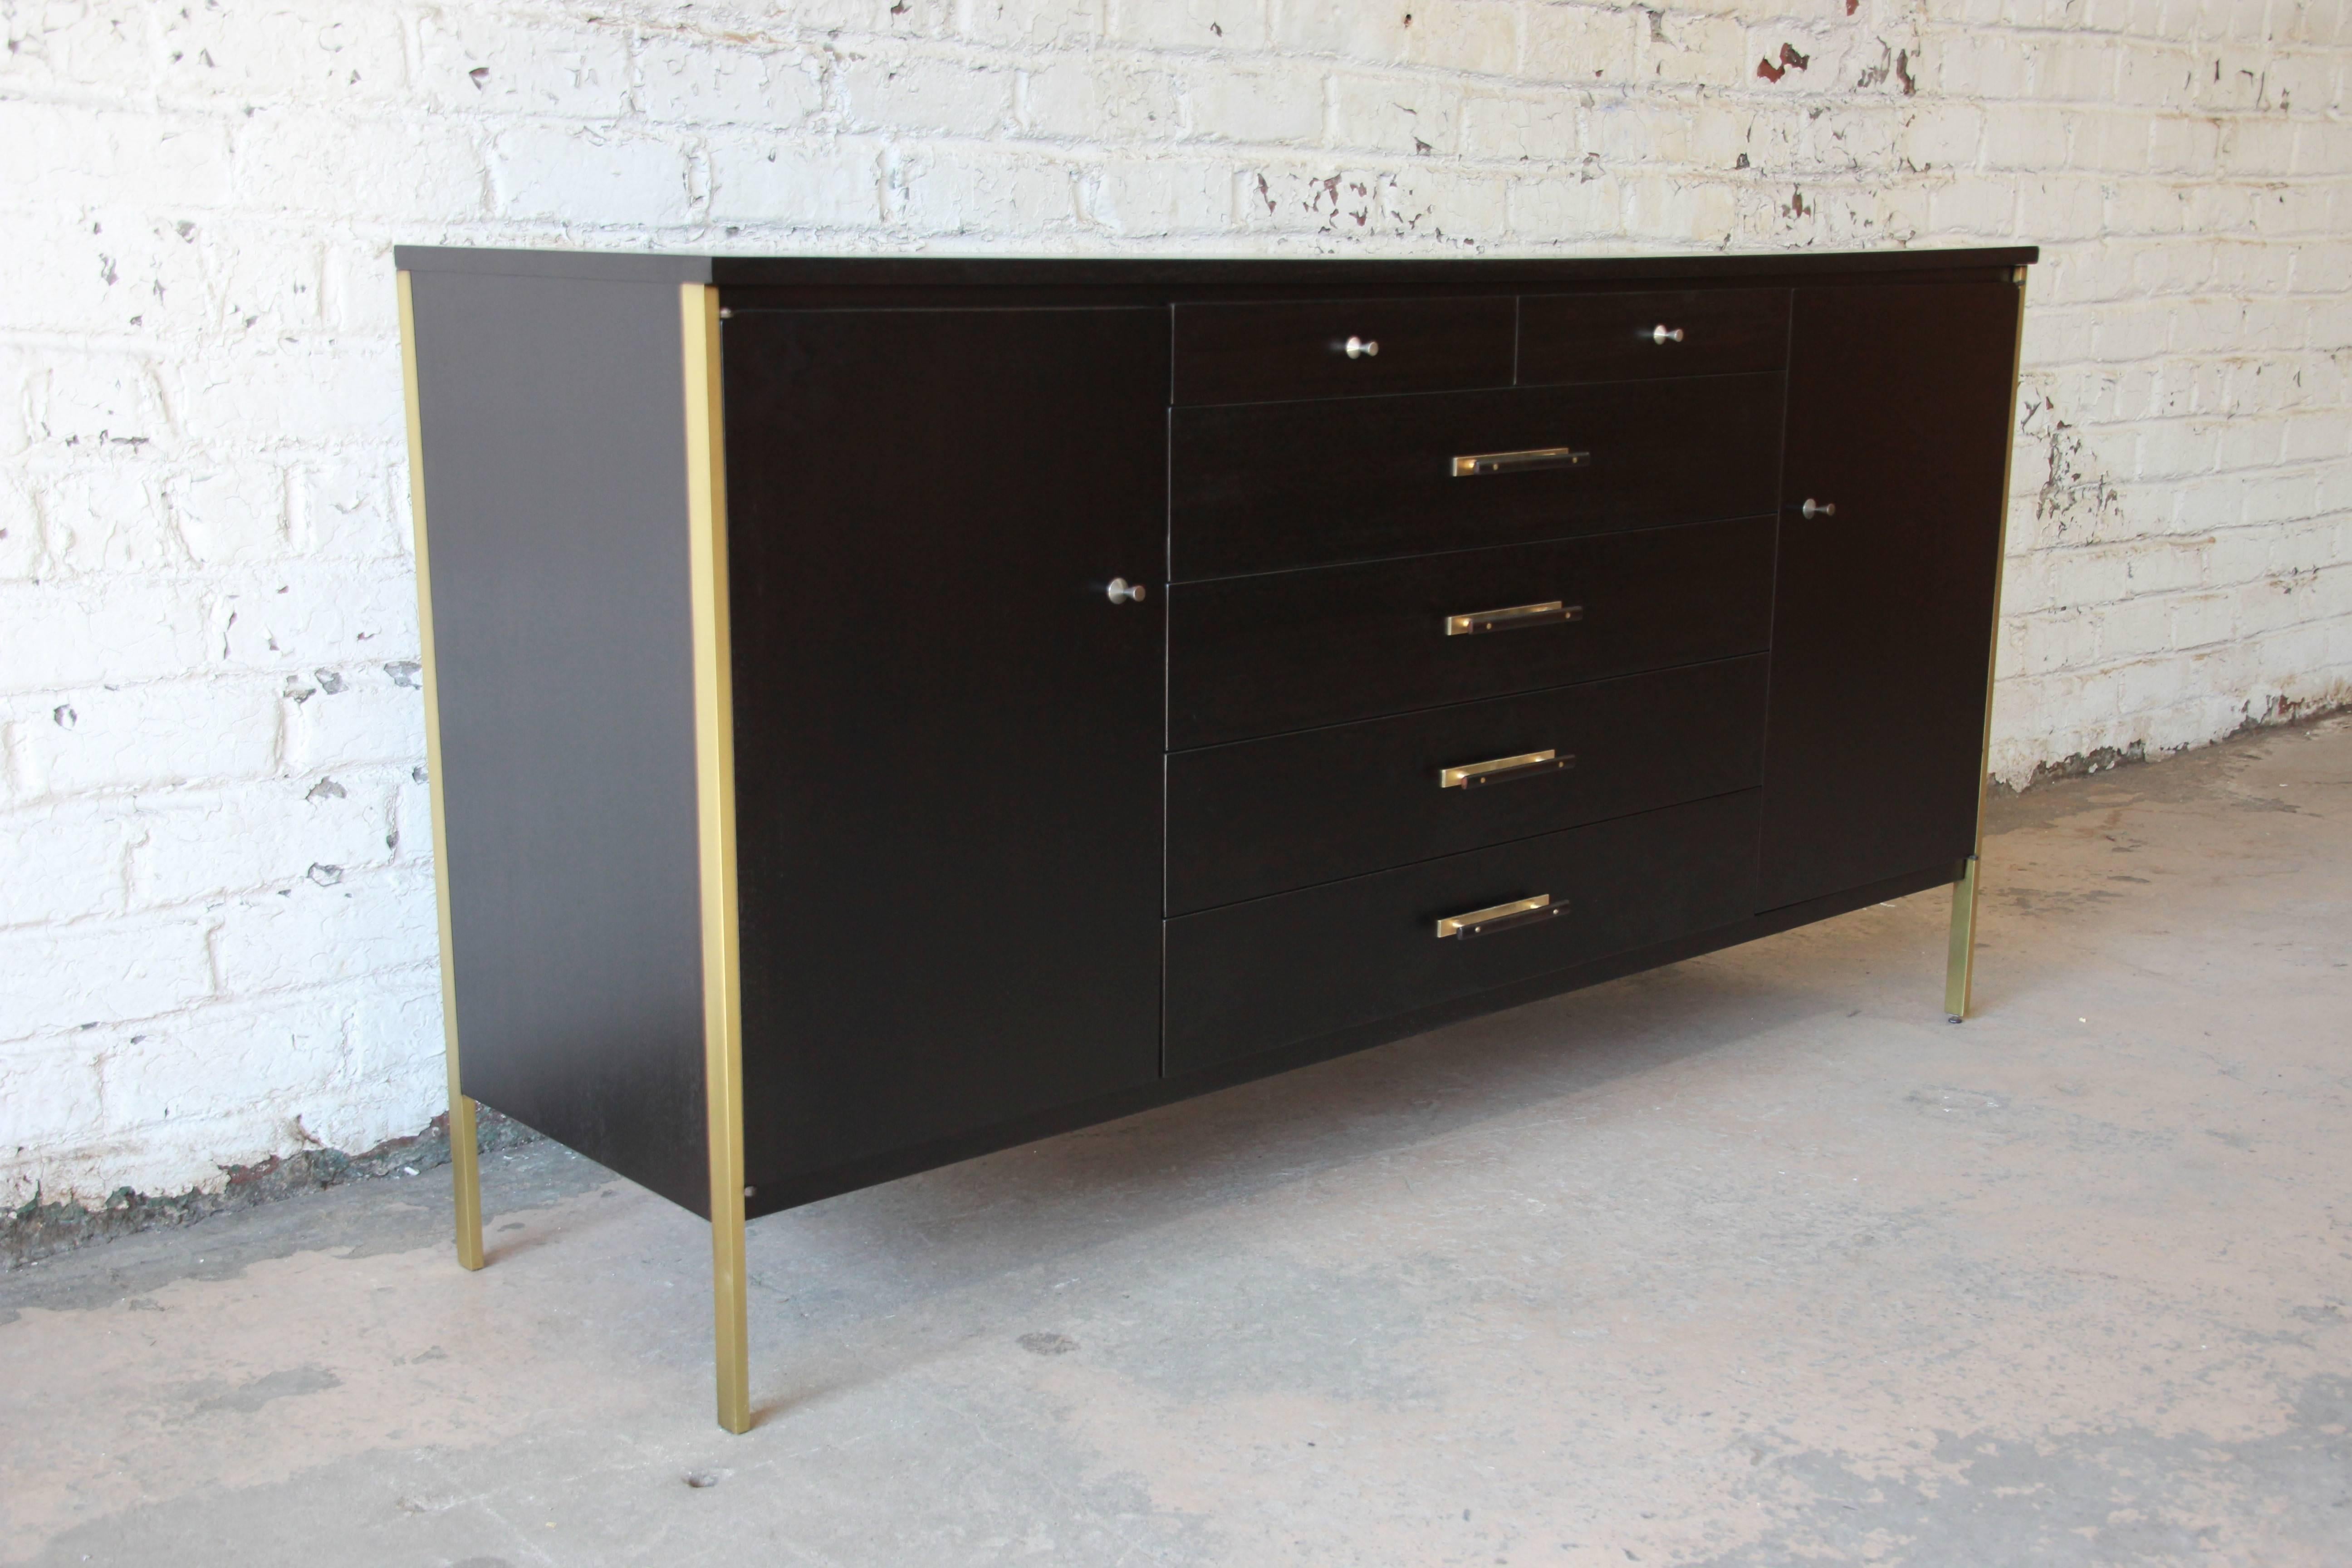 Mid-Century Modern ebonized walnut credenza by Paul McCobb for Calvin Furniture. This credenza has been fully restored with polished brass and original pulls. Six center drawers are flanked by two cabinets with adjustable shelves. The lower shelves